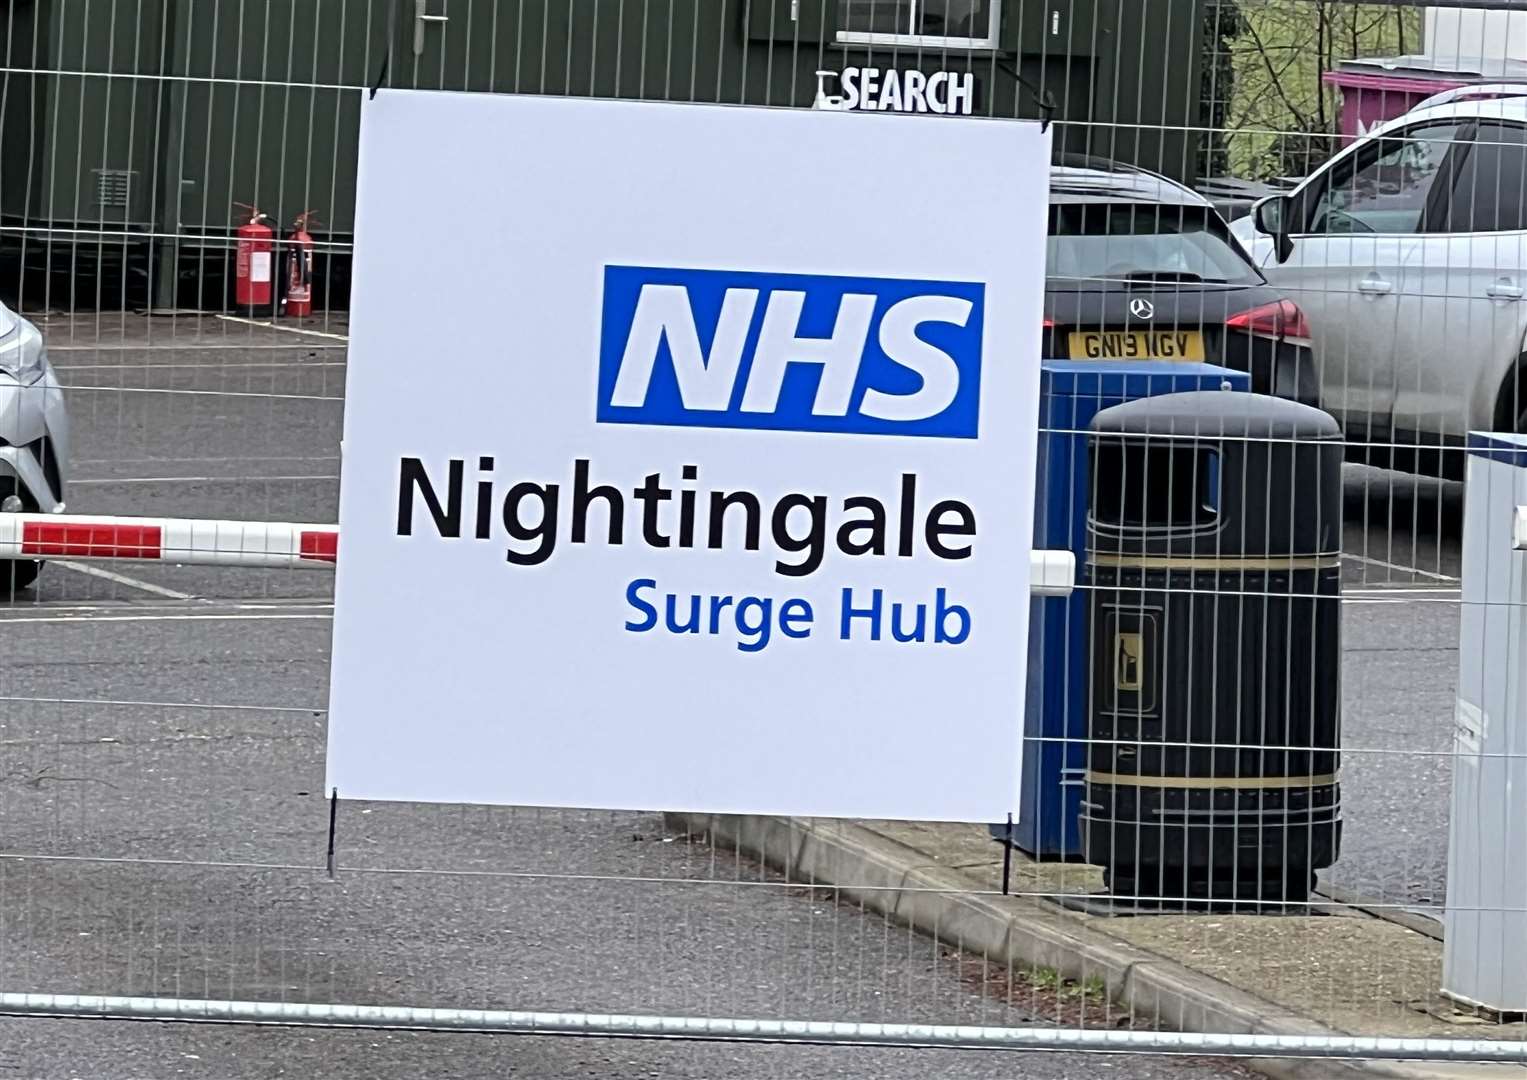 A new surge hub in Ashford will be able to cater for up to 100 people